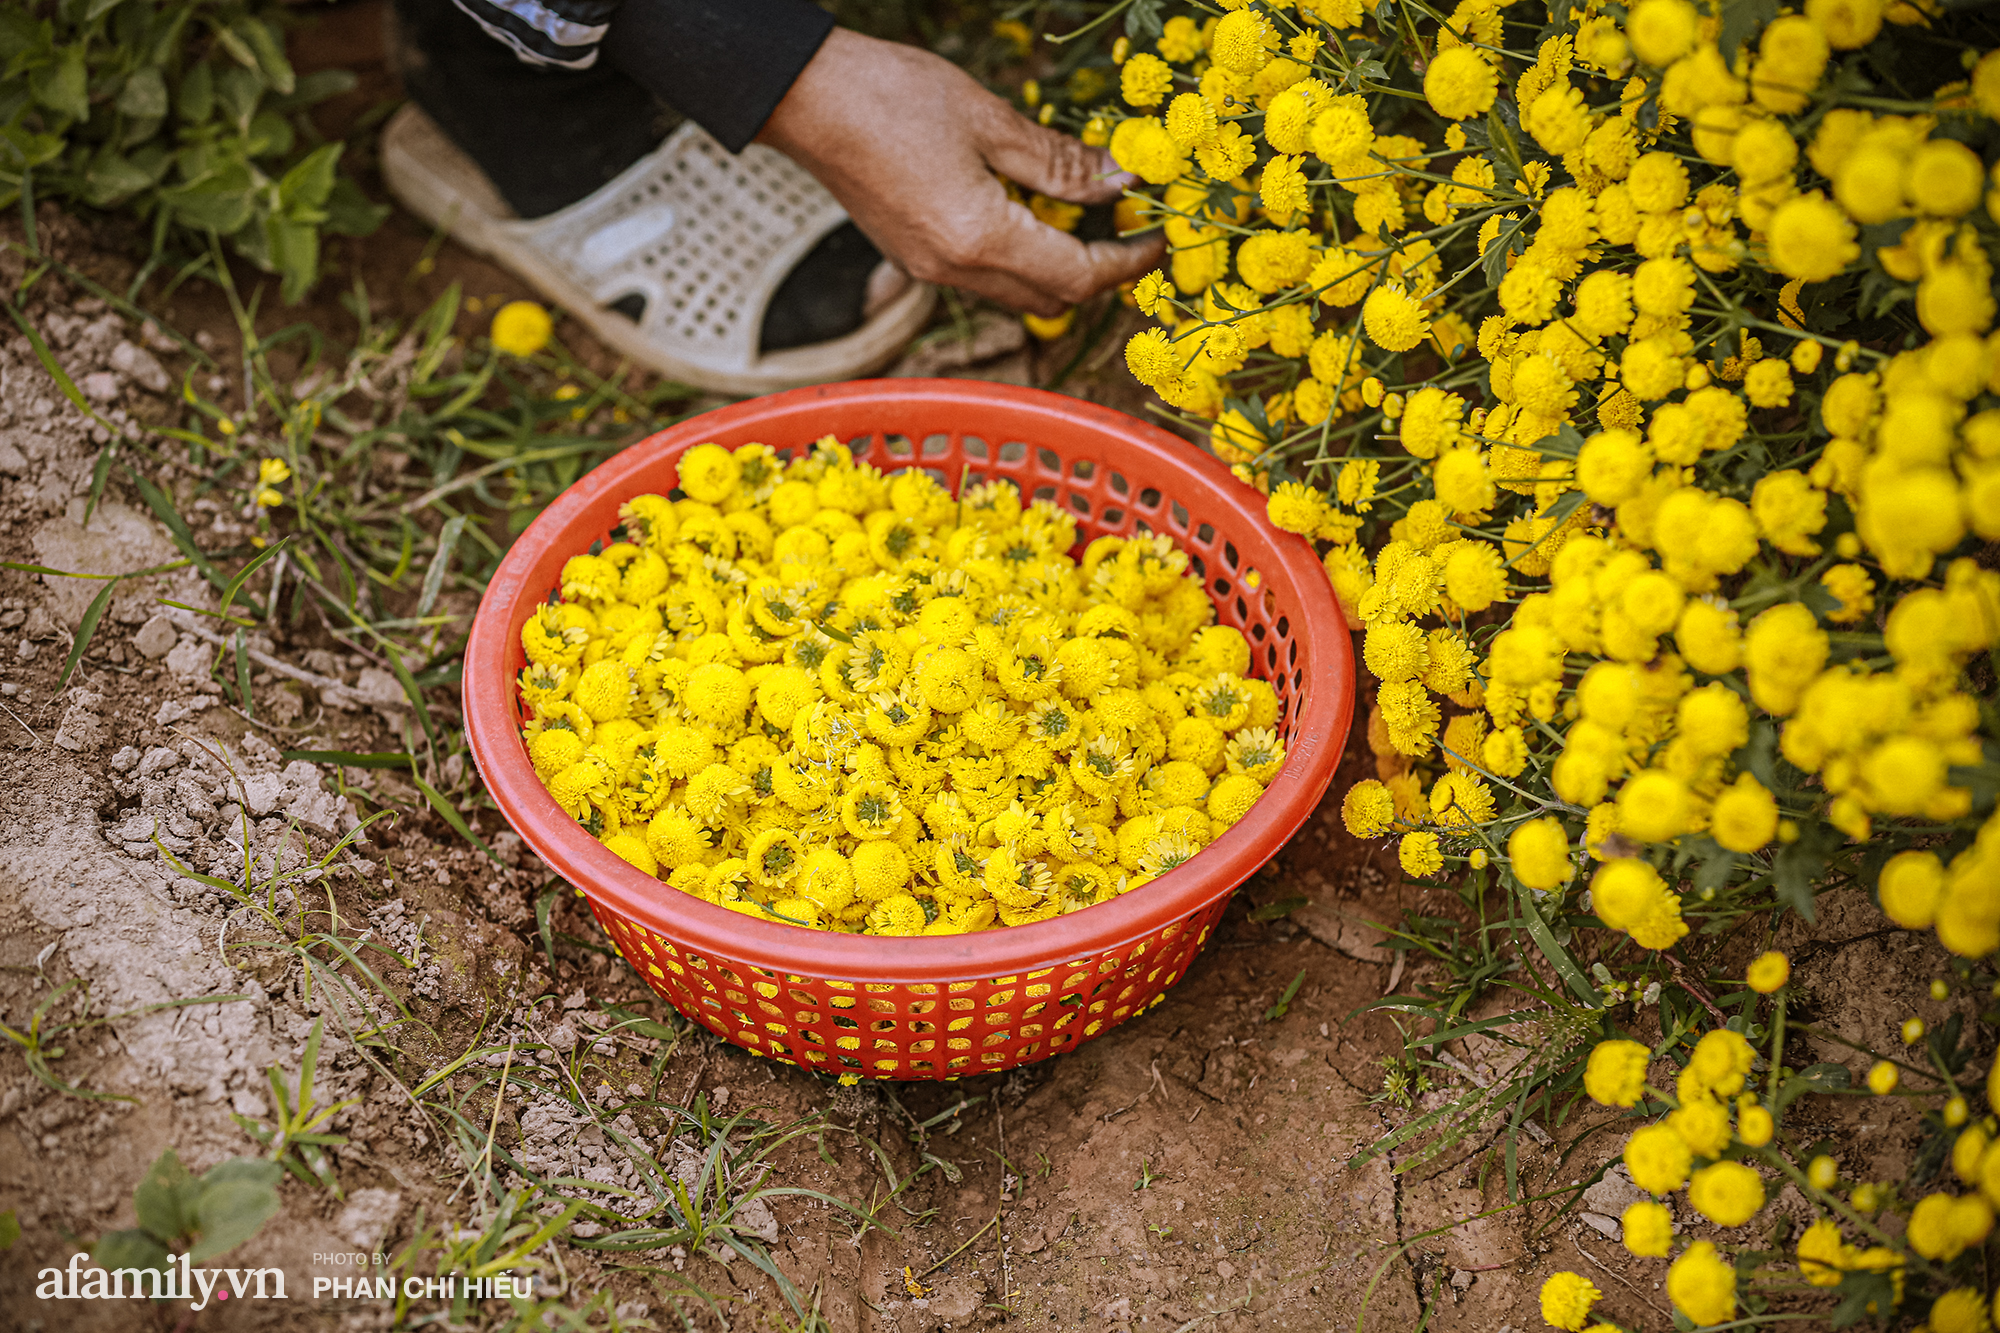 Visit a hundred-year village near Hanoi, possessing the "kingly" chrysanthemum fields  golden, making people everywhere pouring in to take pictures - Photo 10.